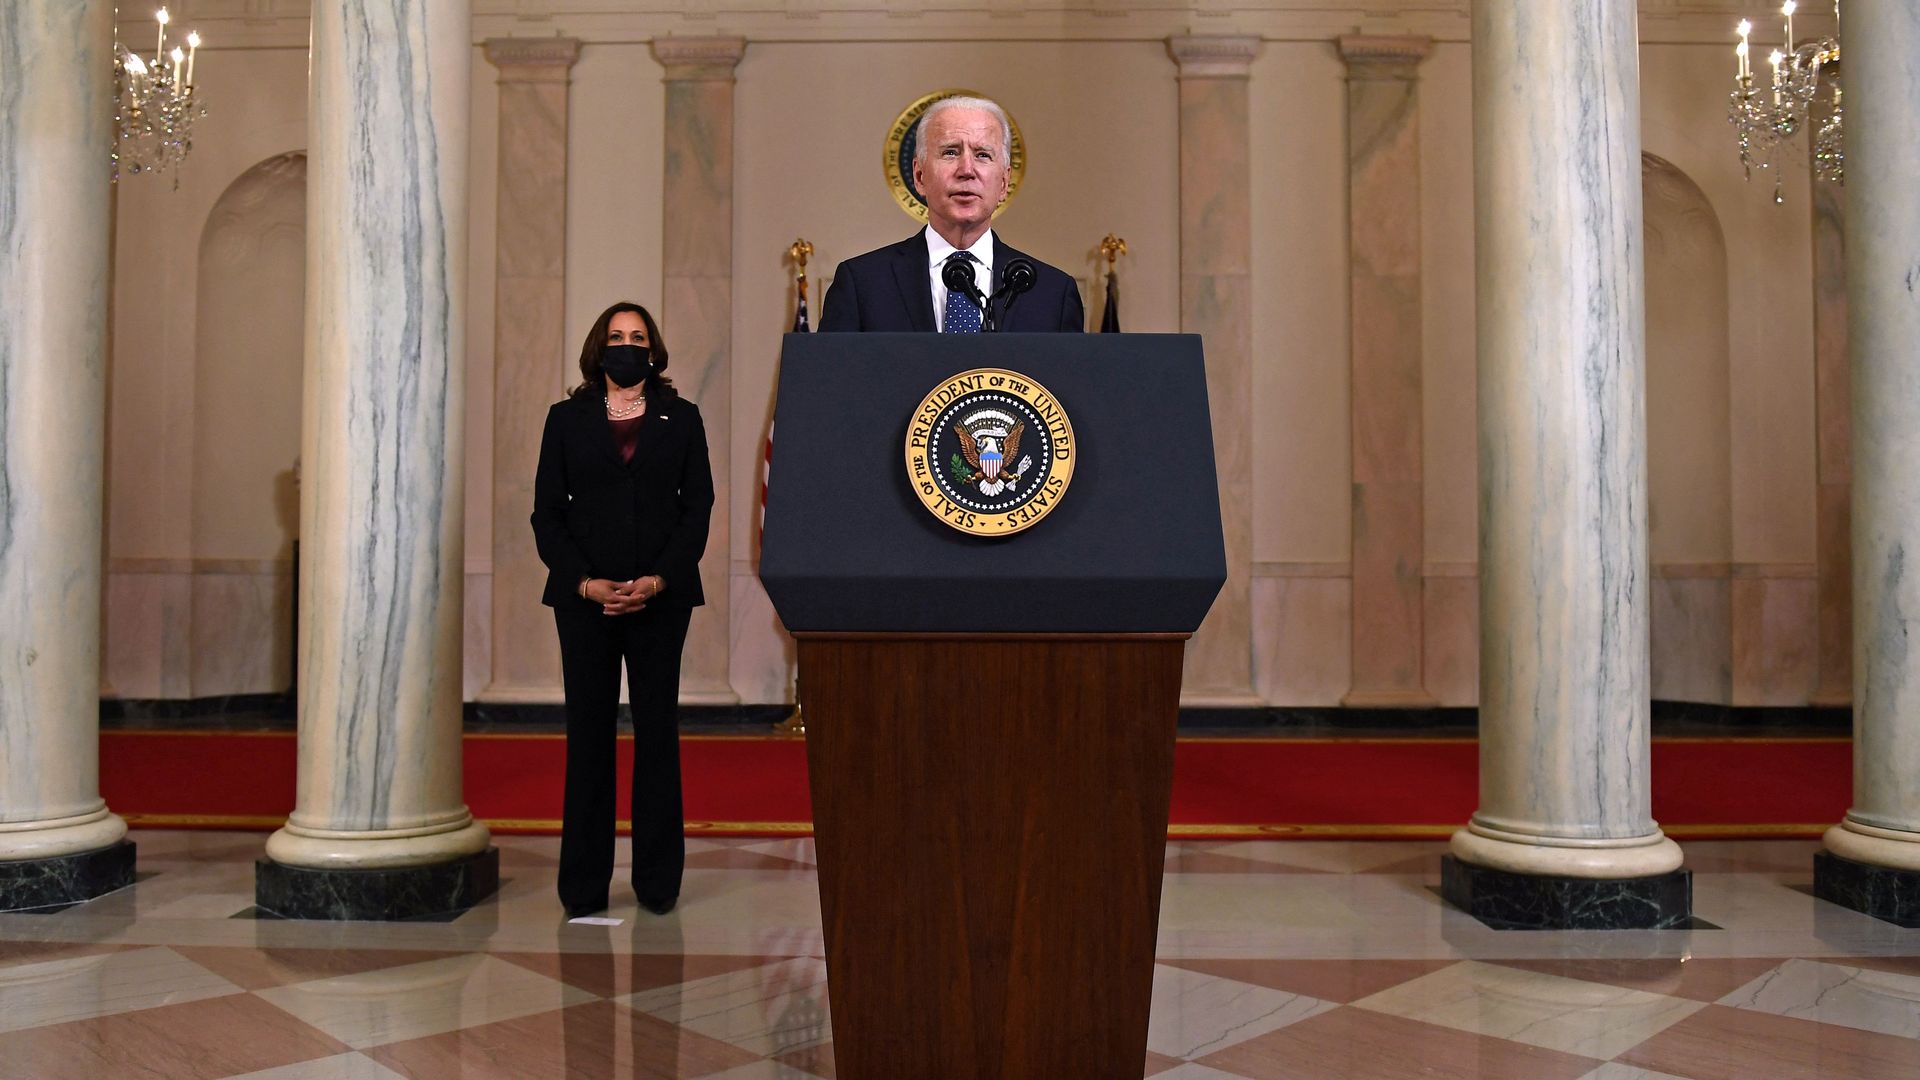 President Biden and Vice President Kamala Harris are seen addressing the nation after the Derek Chauvin verdicts.